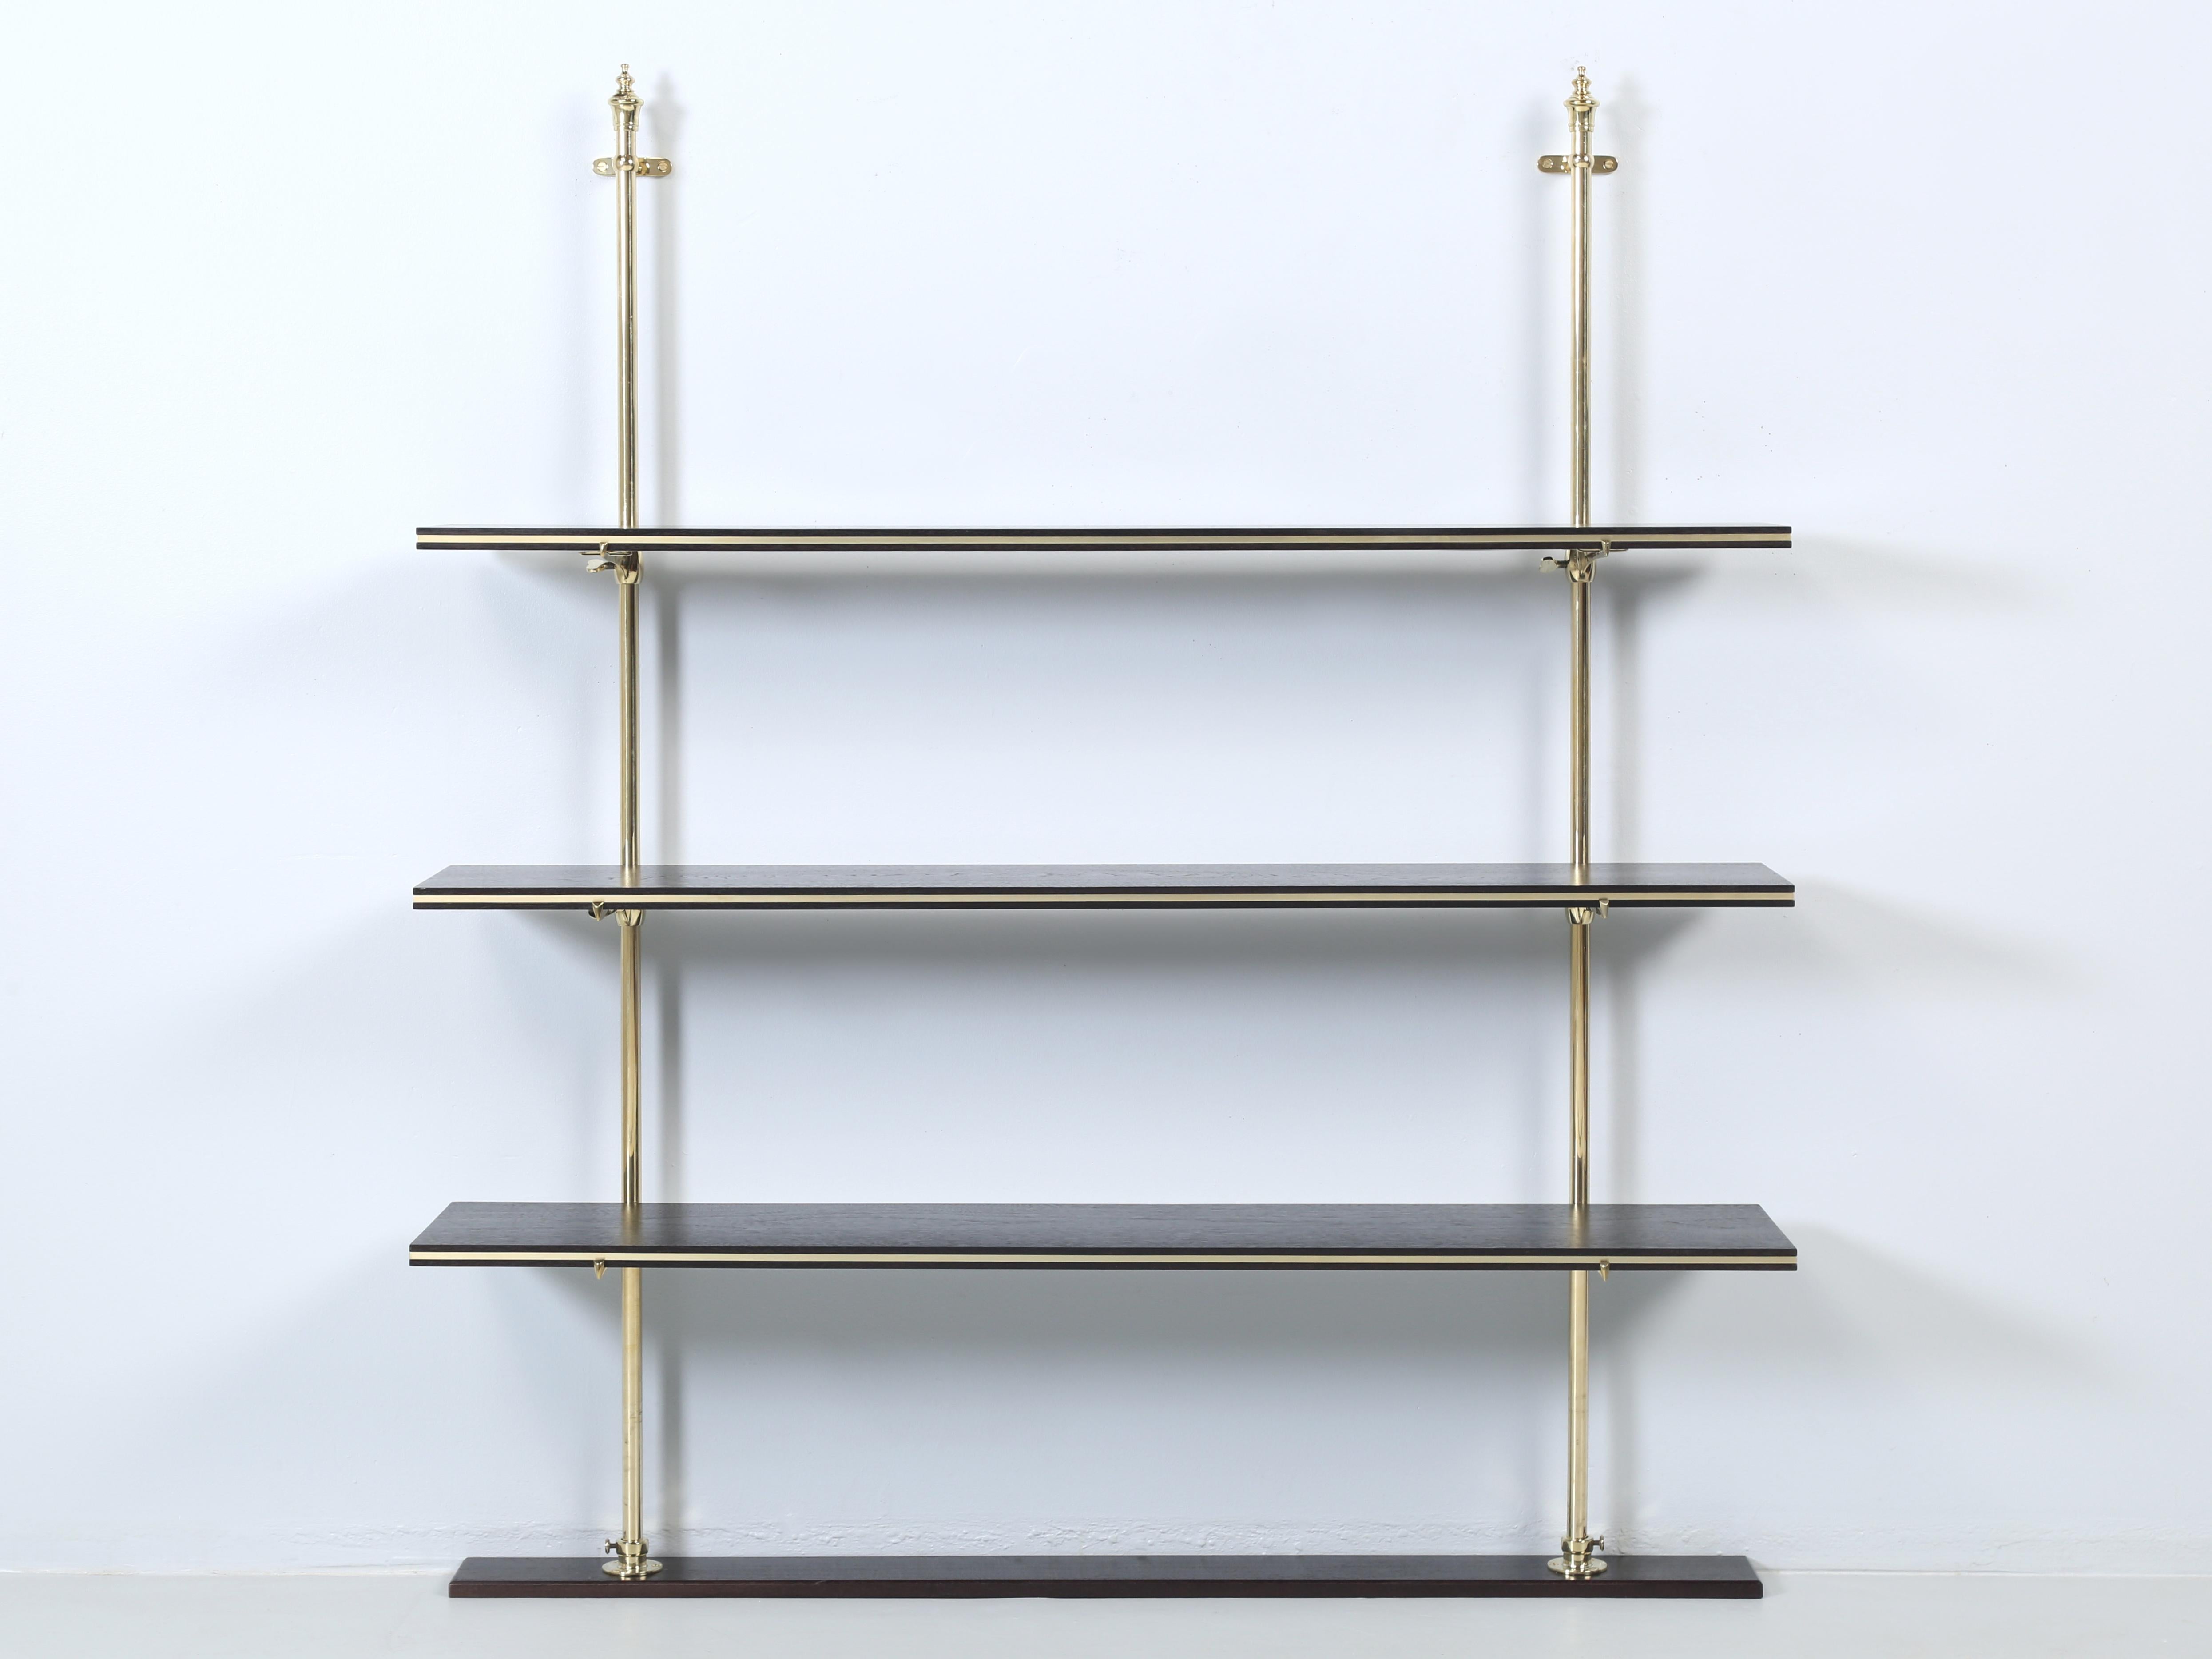 French Pâtisserie Boulangerie (Bakery) or Possibly a French Bistro Brass Shelf Retail Display. Our Old Plank Restoration Department just finished a thorough restoration of our polished brass 3-shelf display stand with custom fabricated solid walnut